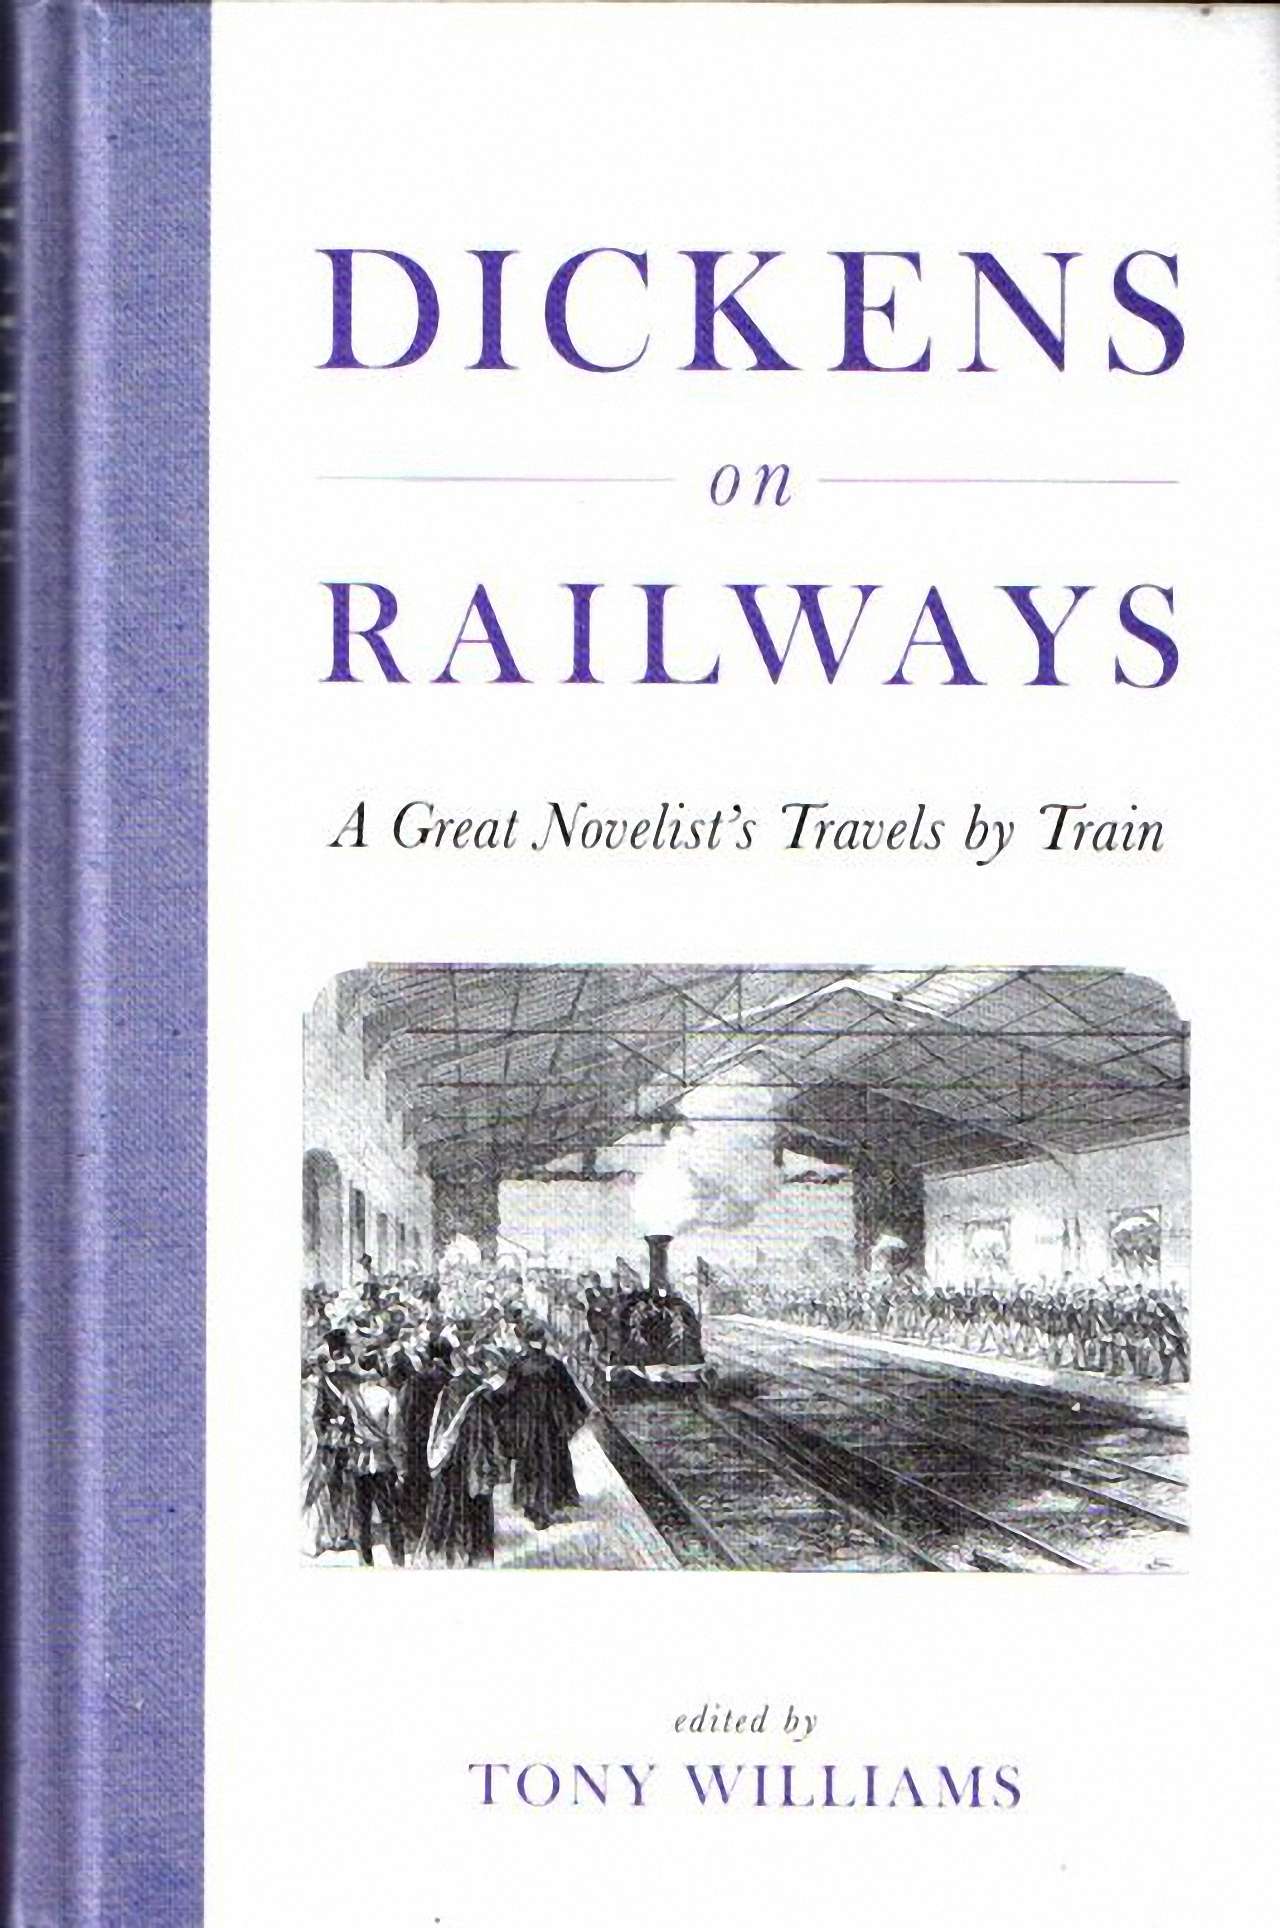 Book Review: Dickens on Railways – A Great Novelist’s Travels by Train – Edited by Tony Williams